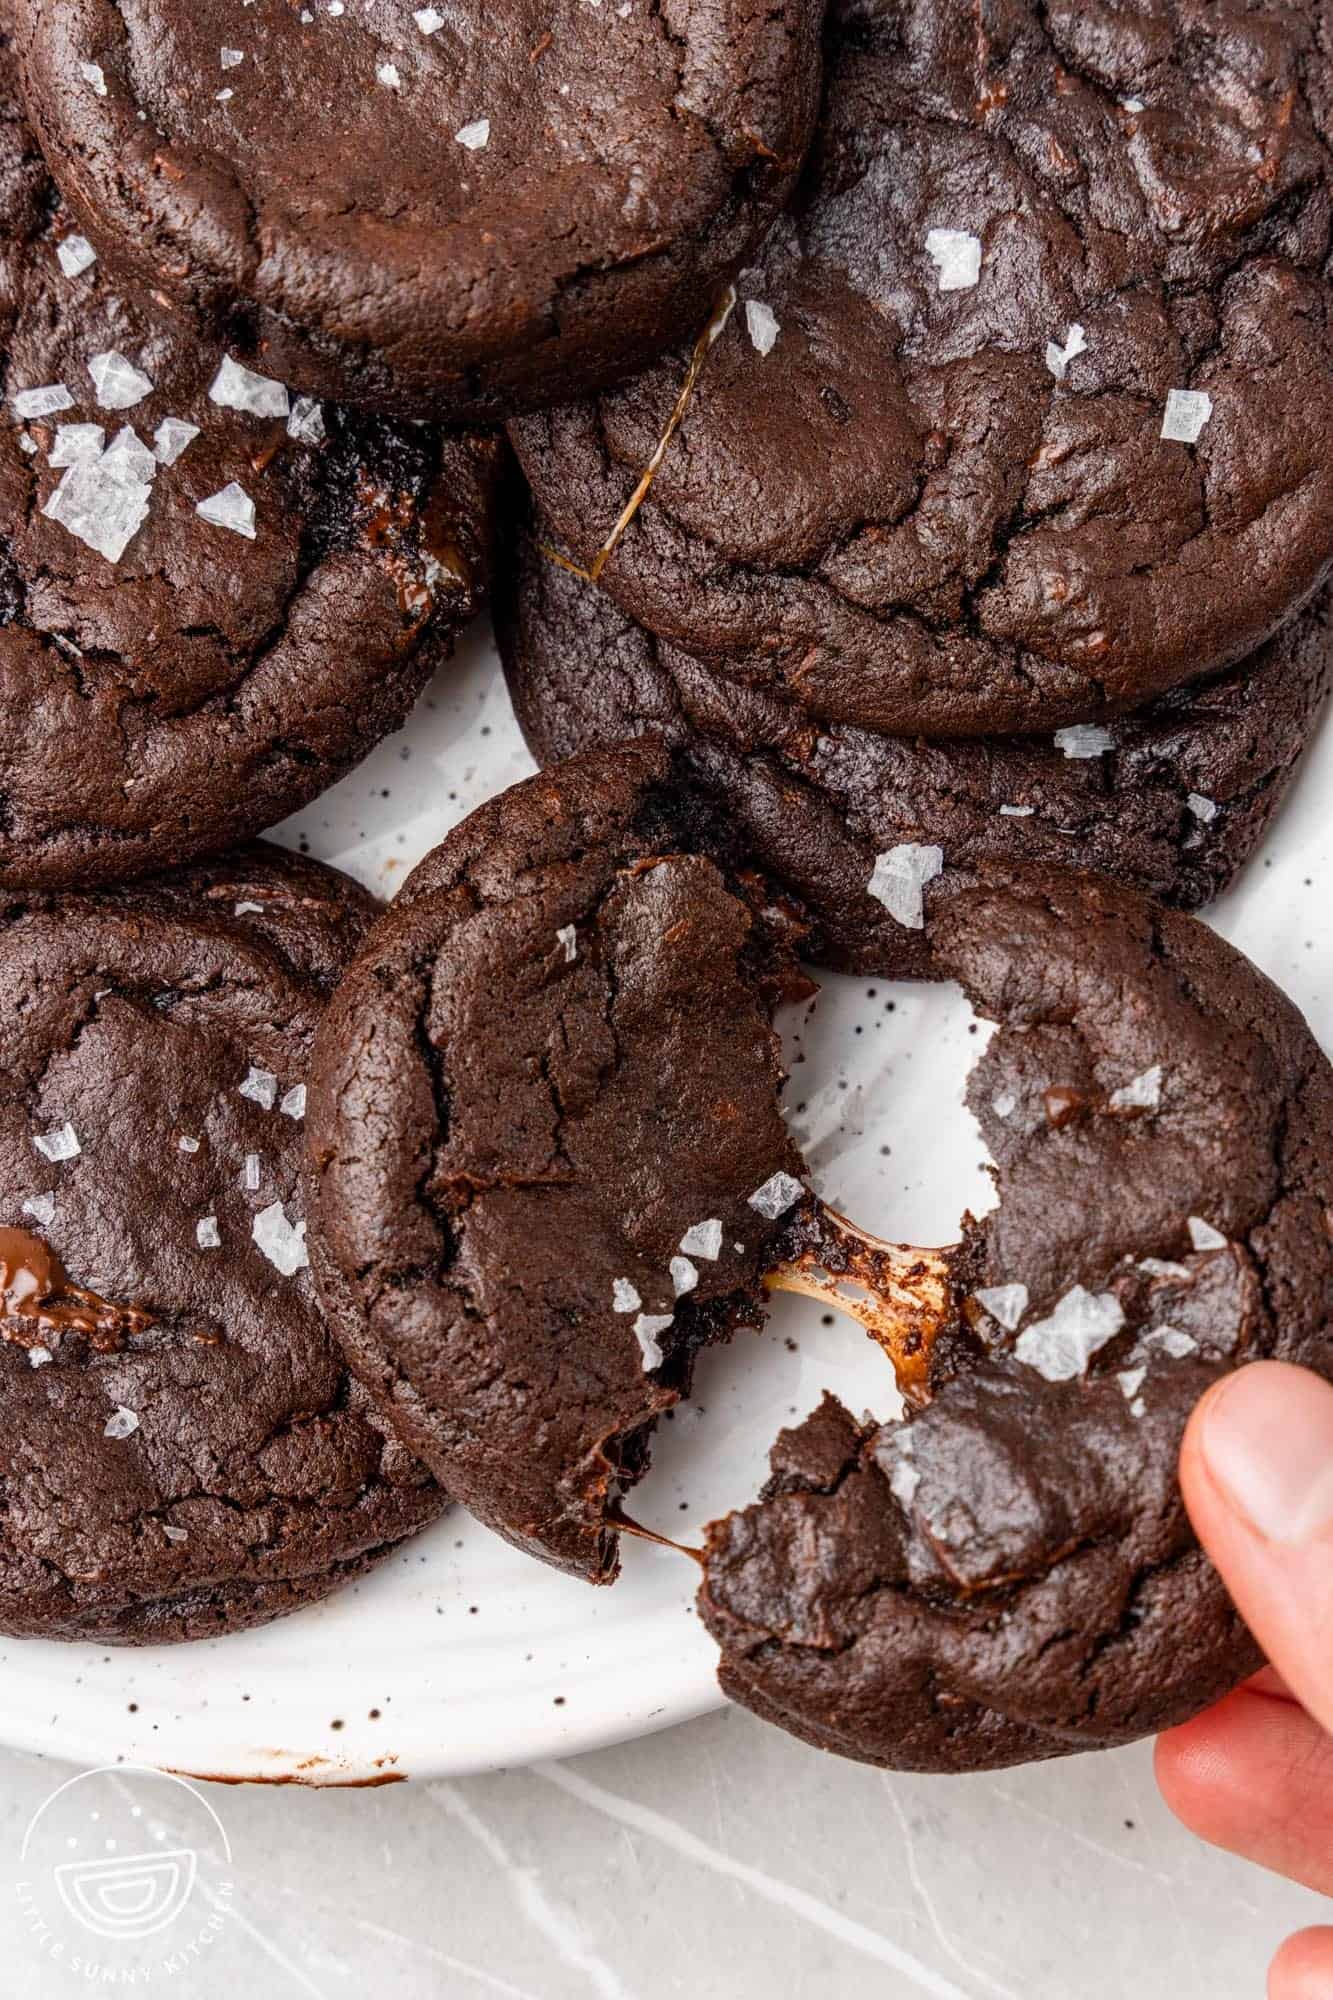 a hand pulling apart a chocolate cookie to reveal melted caramel in the center.